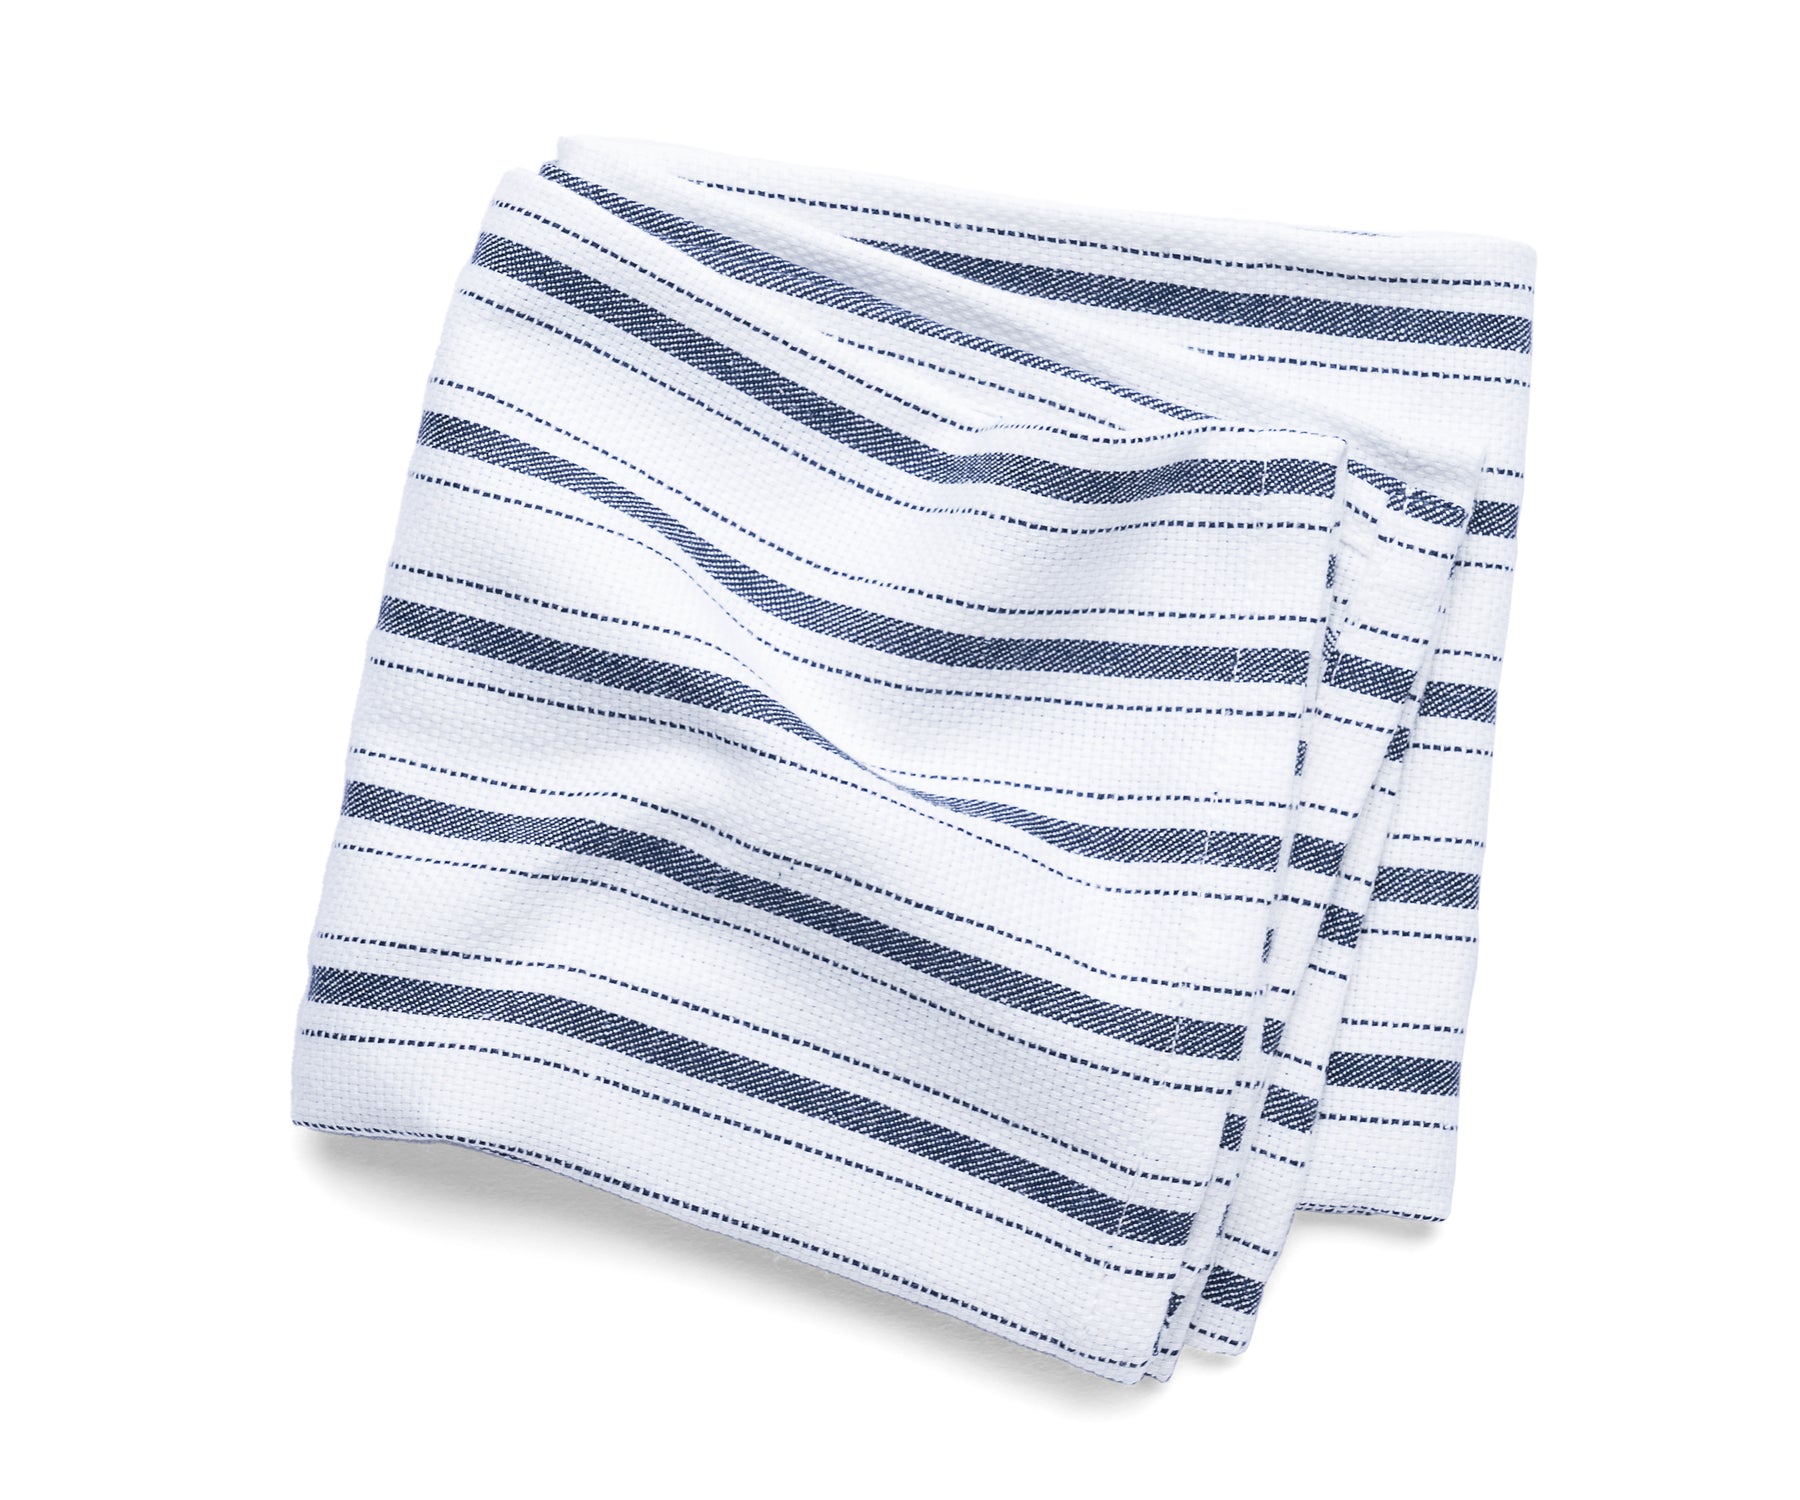 kitchen towels set of 6, navy and white striped dish towels cotton, drying dish towels, dish cloths and dish towels.